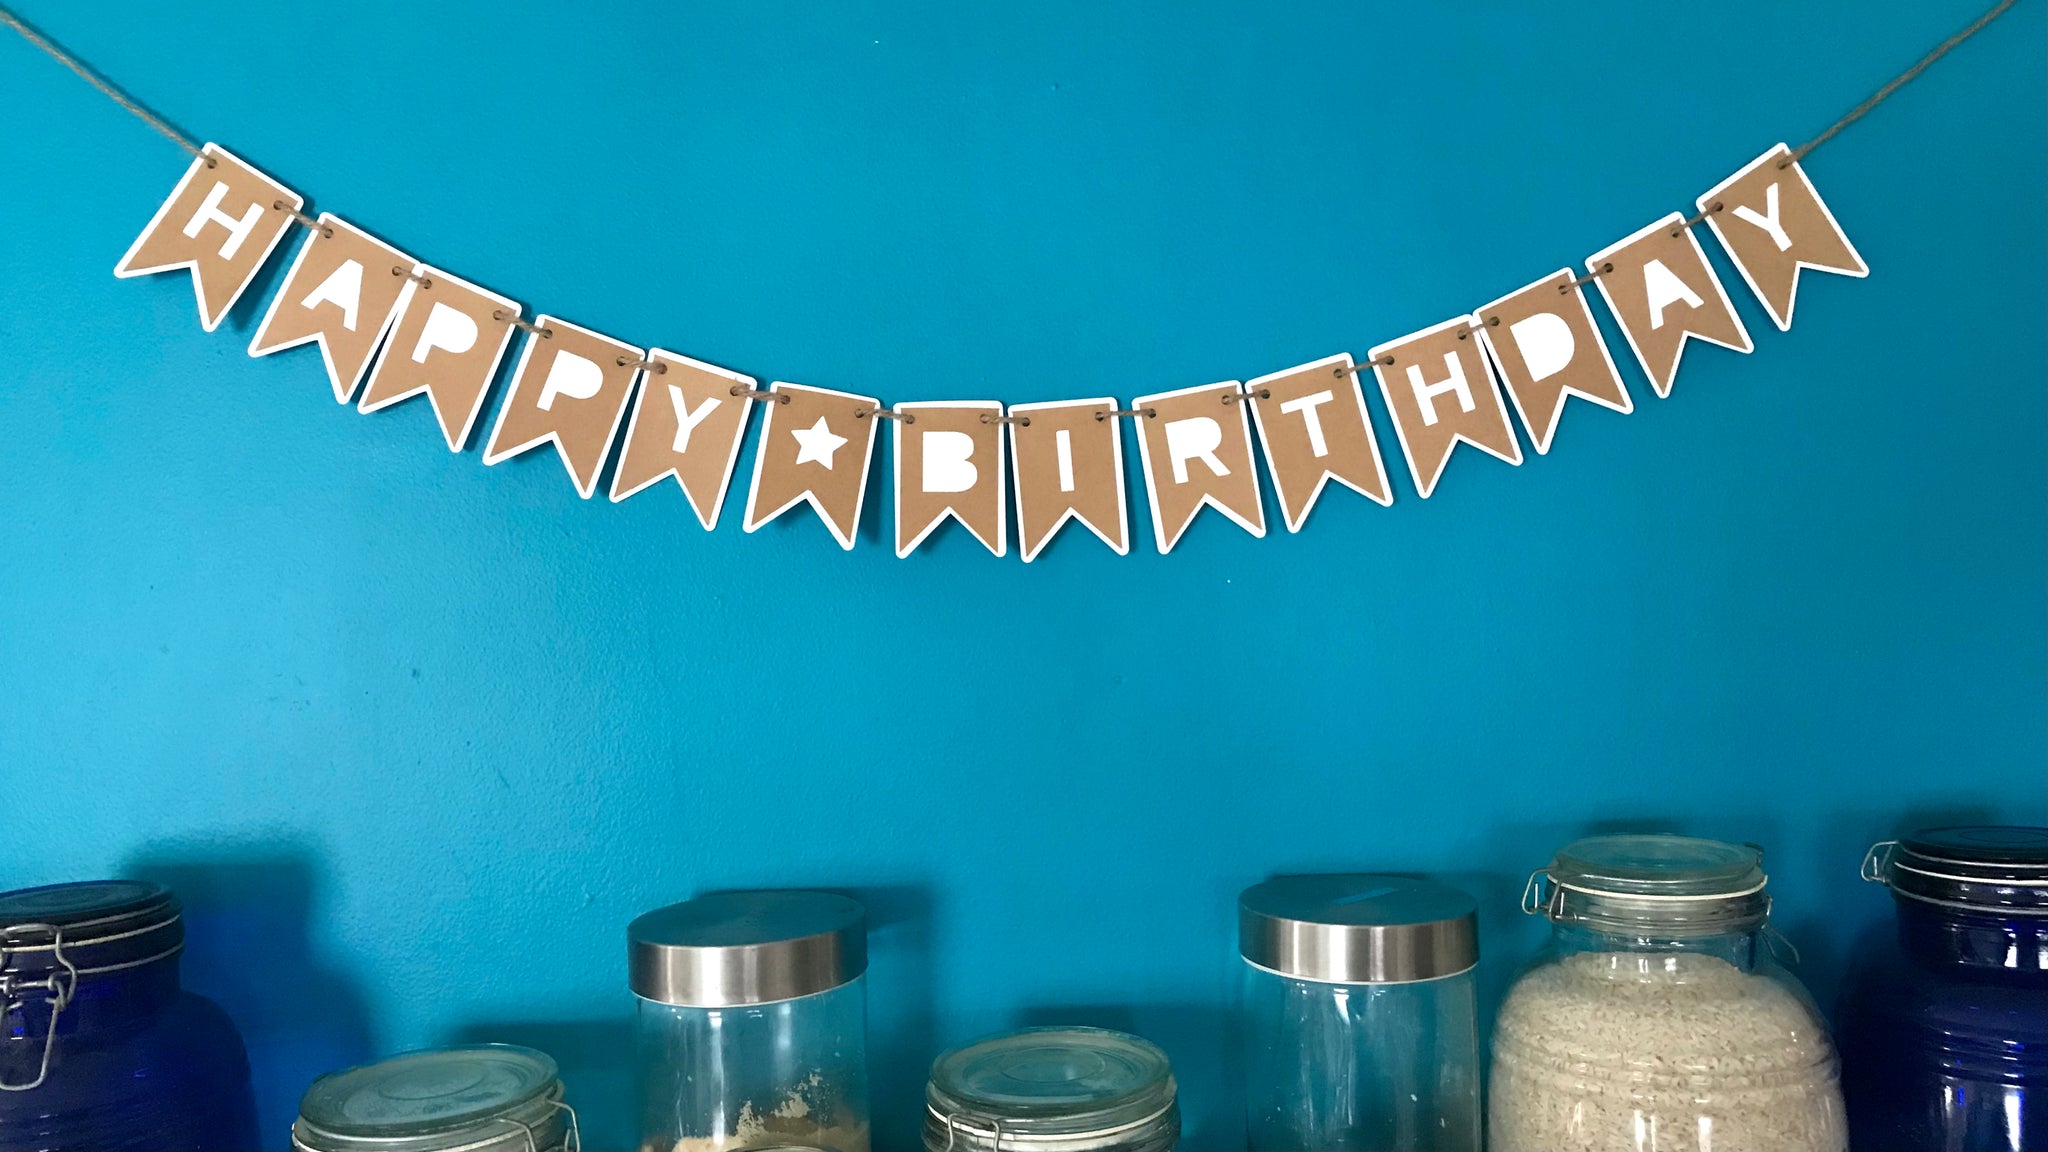 A small happy birthday banner made from kraft brown and white paper is hung against a blue wall above dry food storage.  